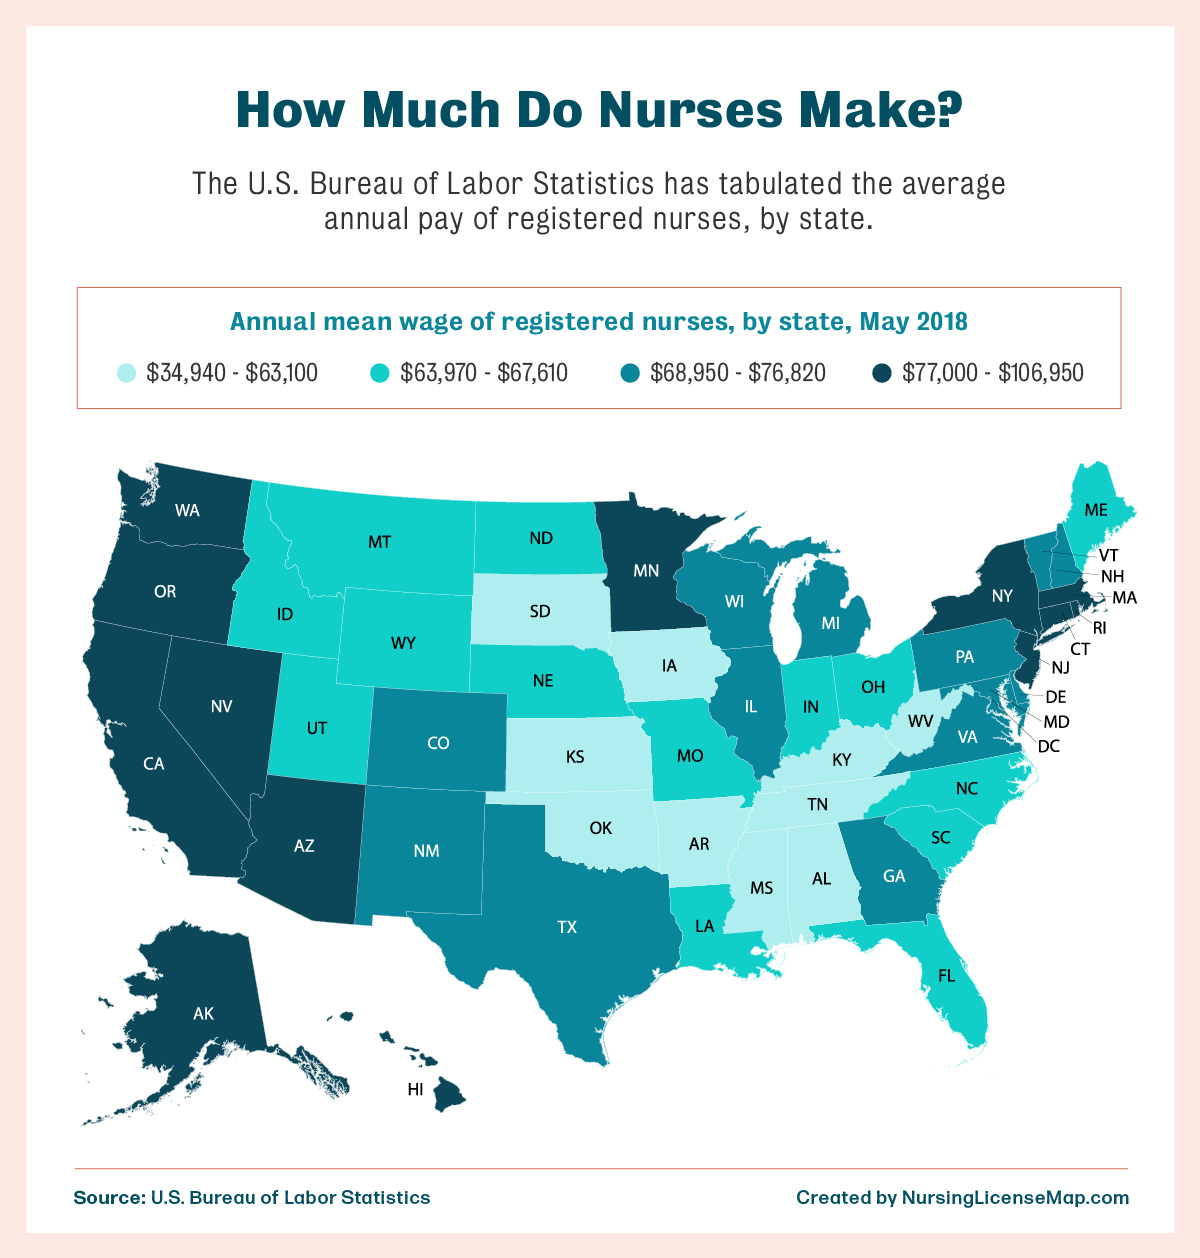 Registered nurses in top-paying states like California and Oregon can make between $91,000 and $106,000 per year.